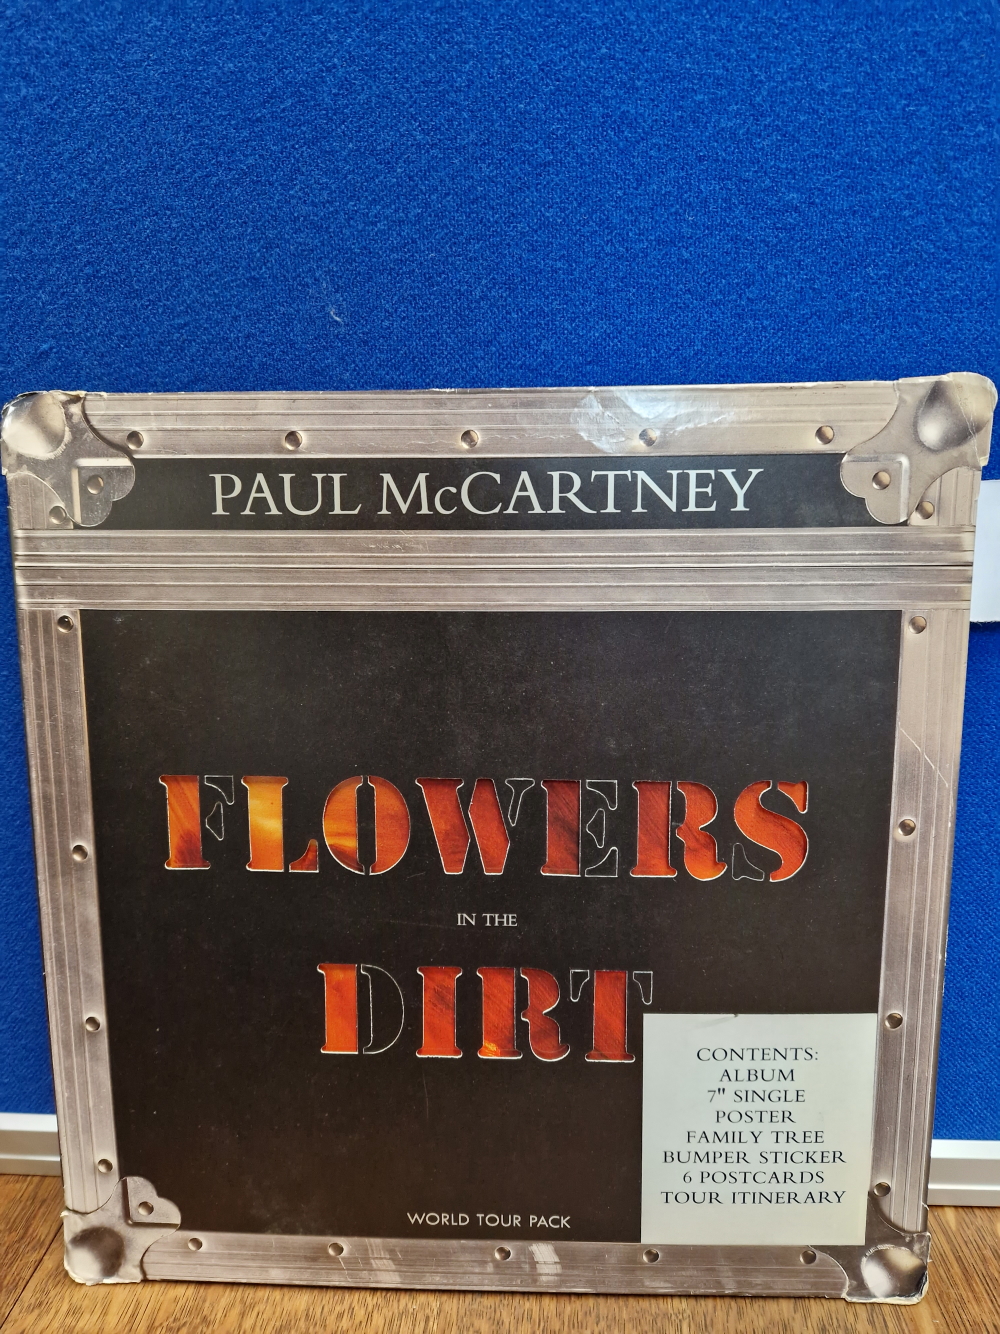 PAUL MCCARTNEY - FLOWERS IN THE DIRT TOUR PACK, PARLOPHONE PCSDX 106 INCLUDES: LP, ONE SIDED 7"